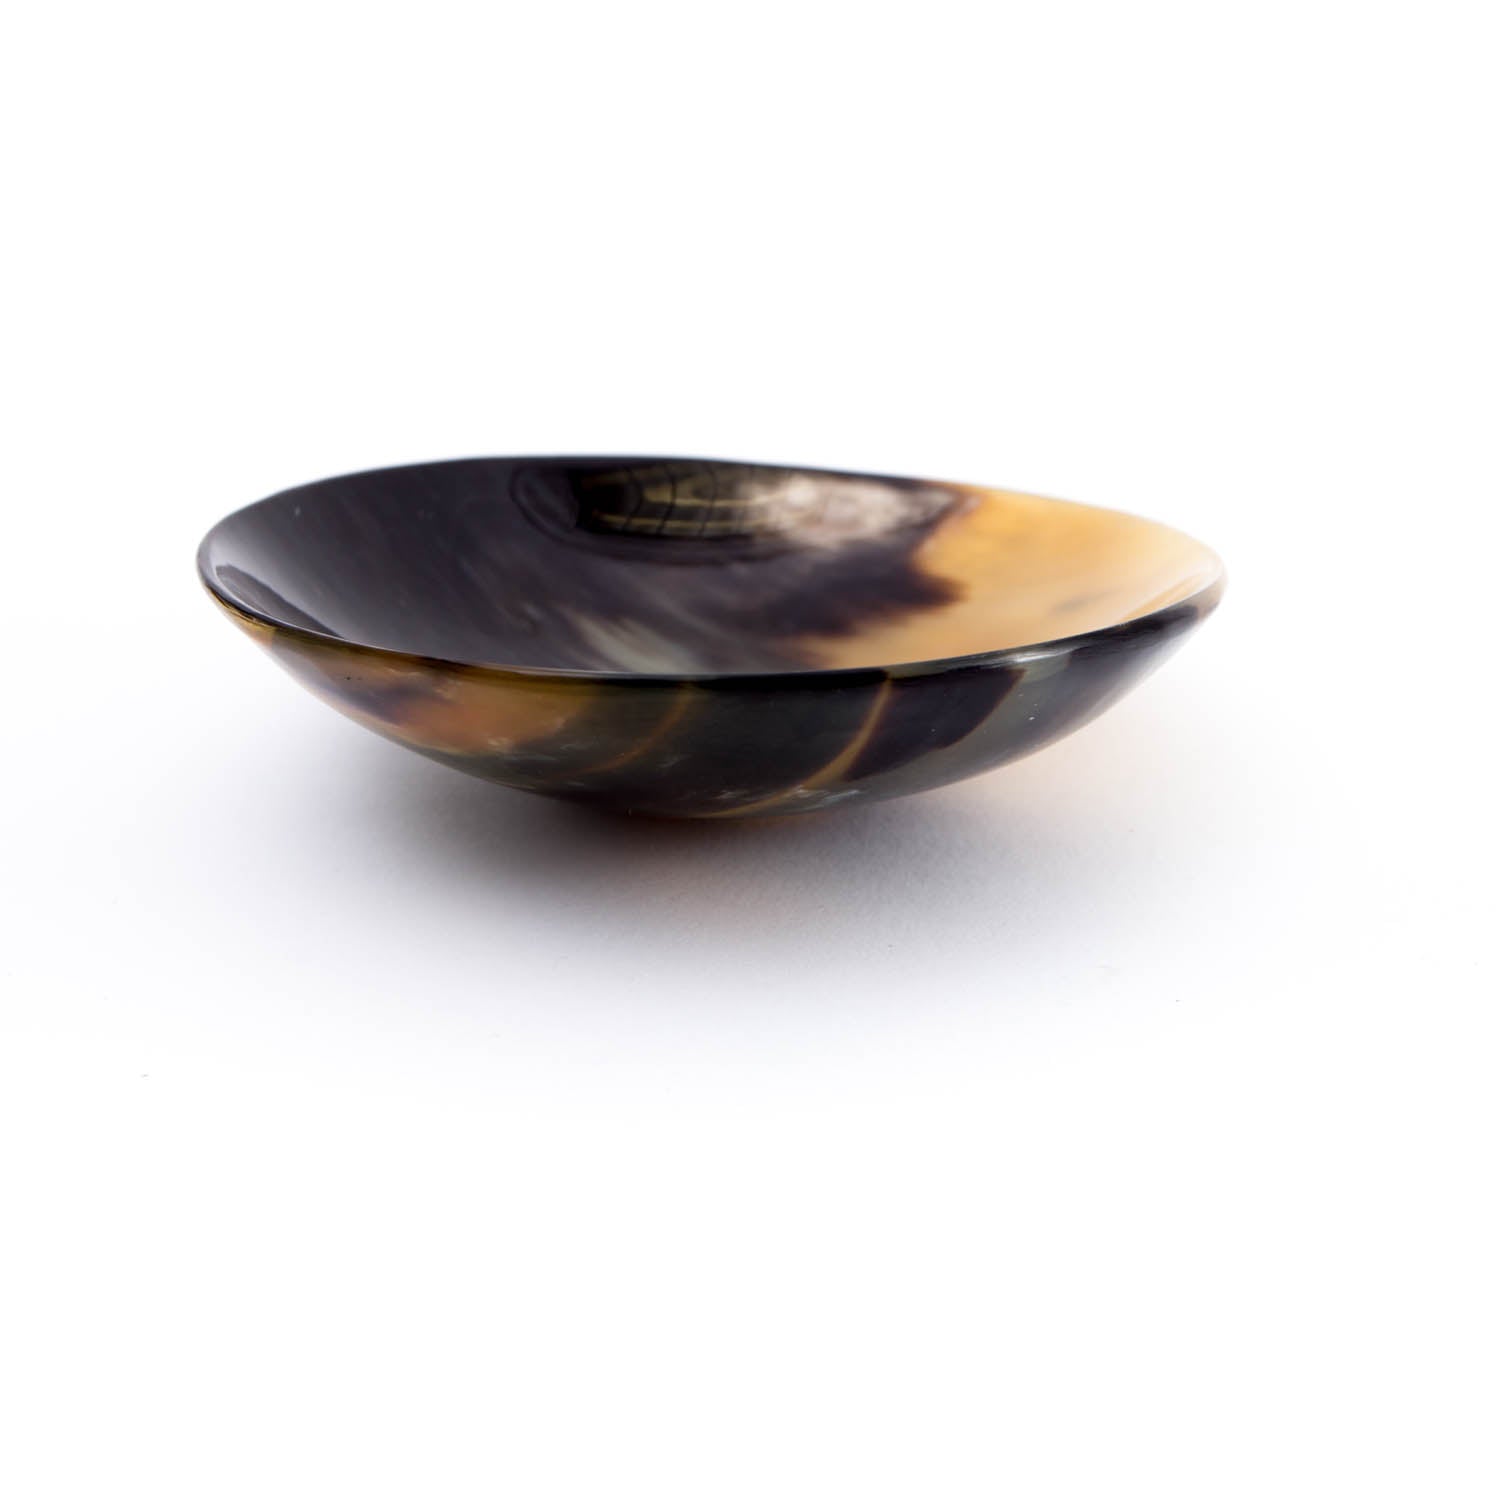 A decorative and functional Polished Oxhorn Coin Dish by KirbyAllison.com.